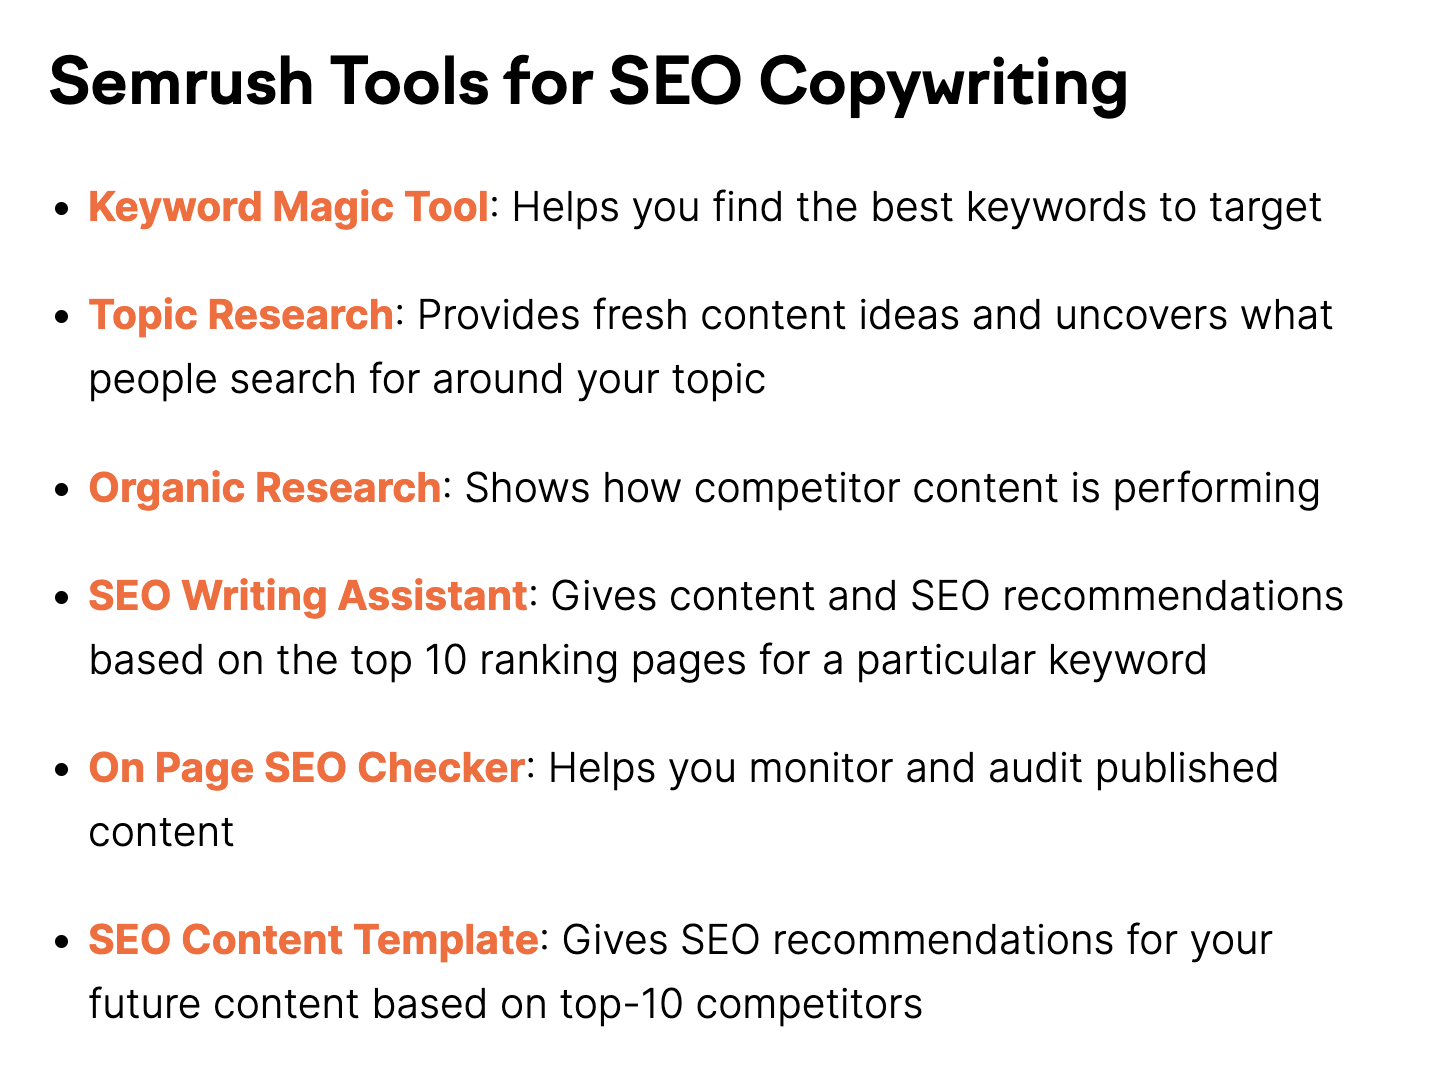 "Semrush Tools for SEO Copywriting" section of the article